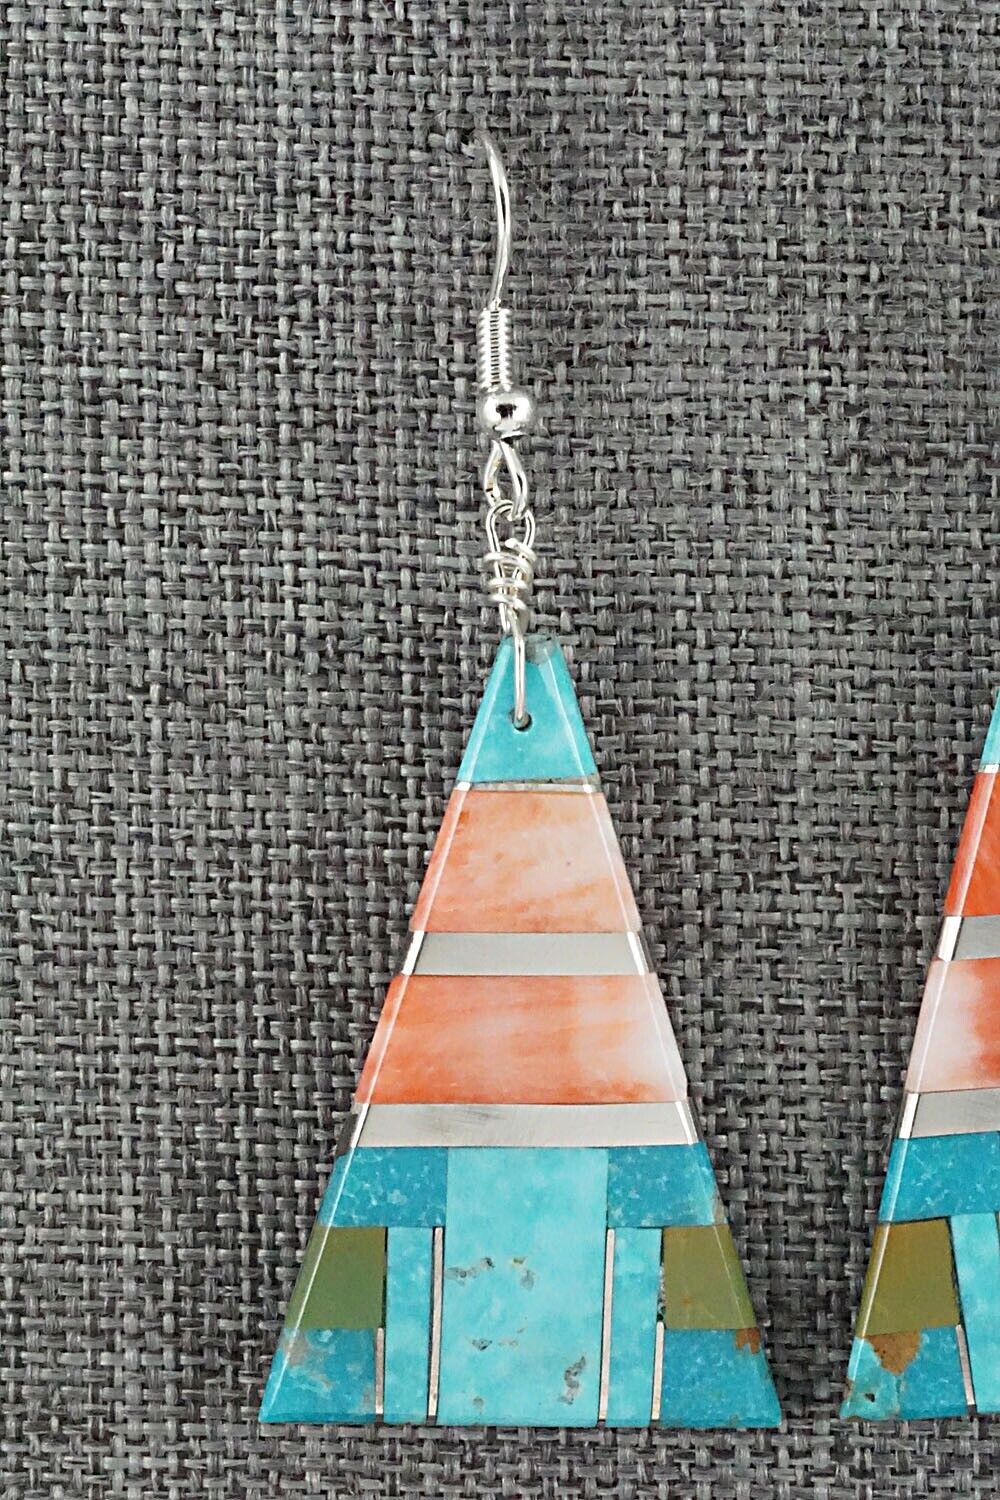 Turquoise, Spiny Oyster & Sterling Silver Inlay Earrings - Daniel Coriz